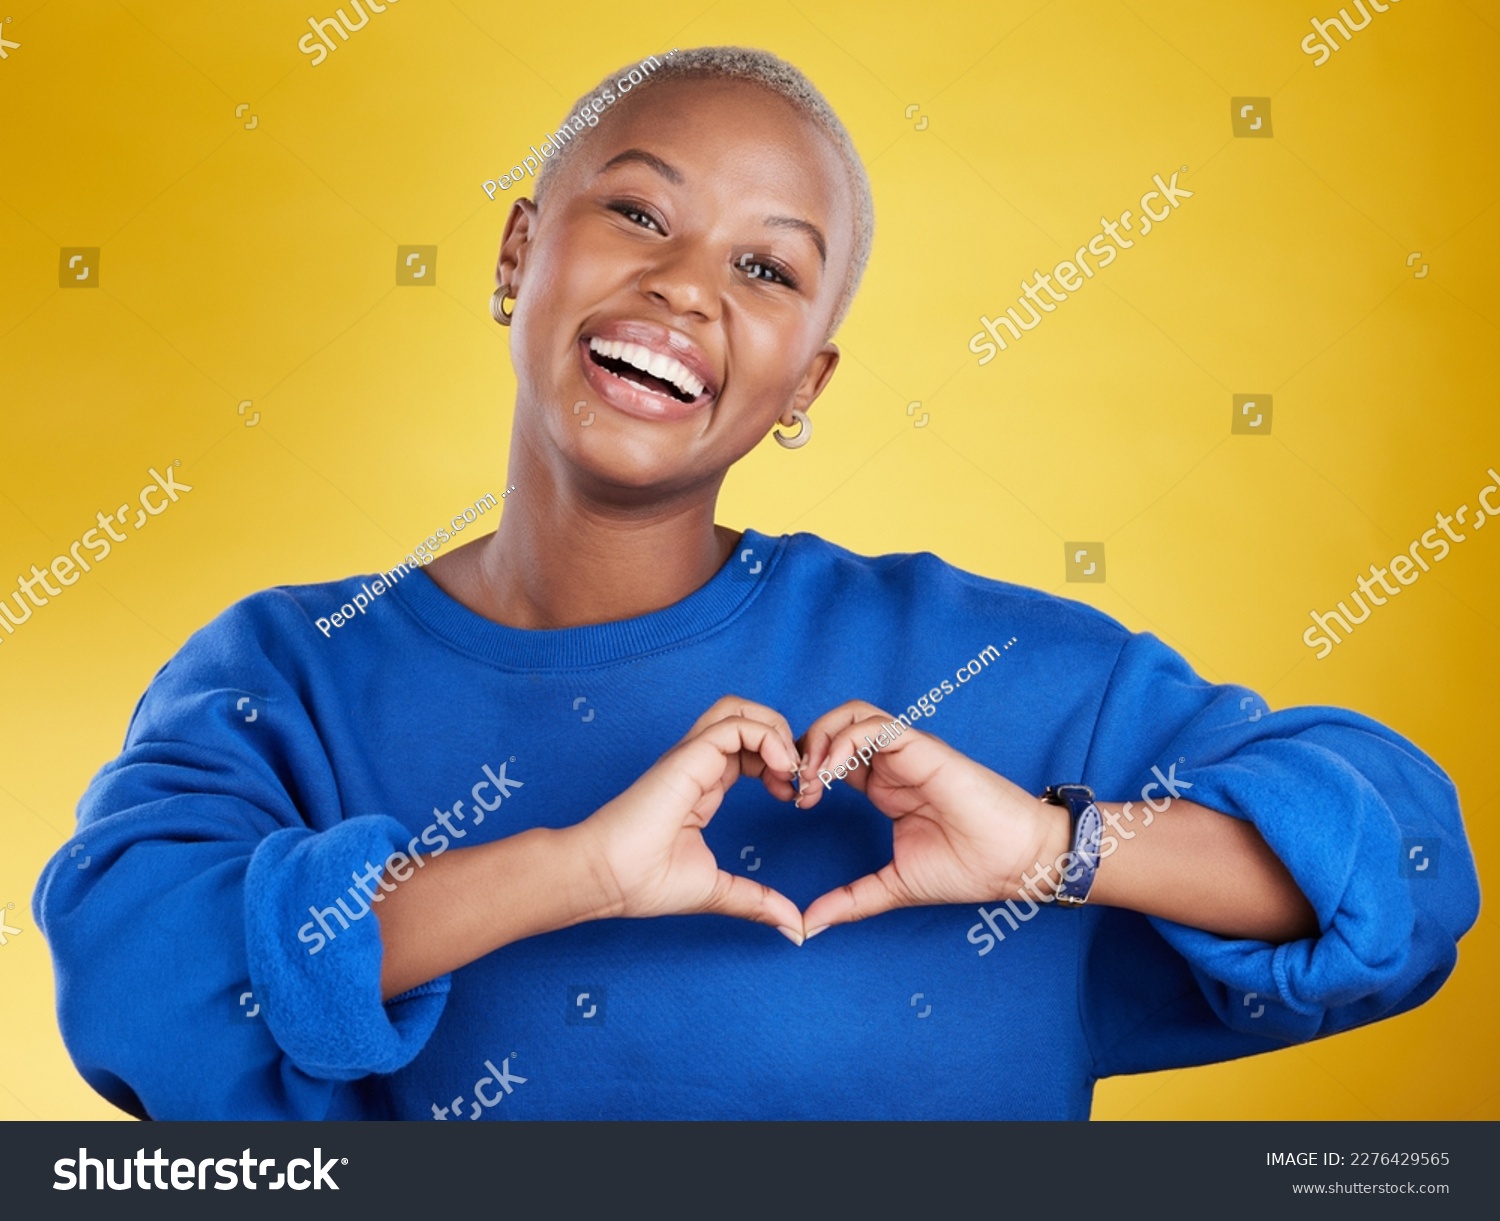 Heart hands, portrait and happy black woman in studio, background and color backdrop for emoji. Smile, female model and finger shape for love, thank you and support of peace, care or sign of kindness #2276429565